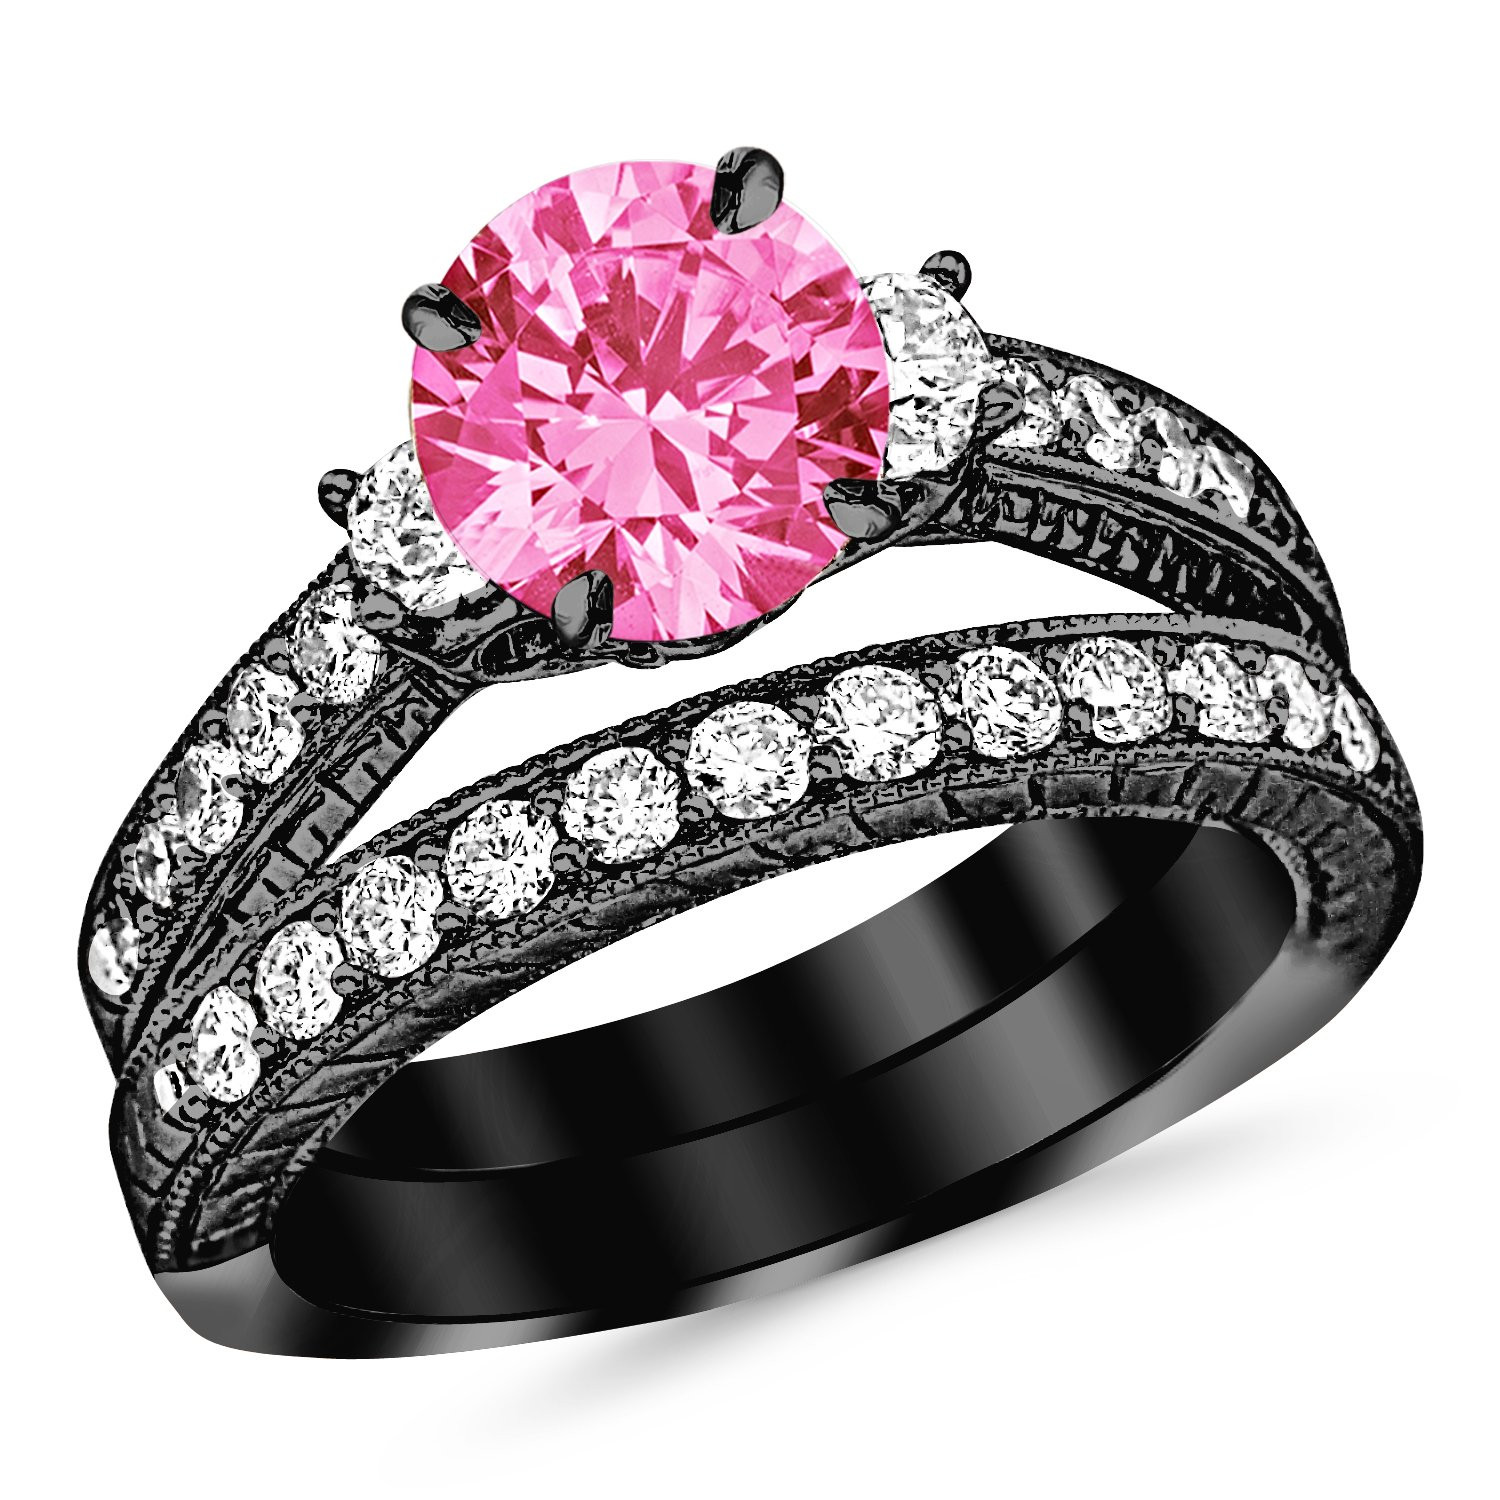 Pink And Black Wedding Ring Sets
 Genuine Pink Sapphire Jewelry – September Birthstone